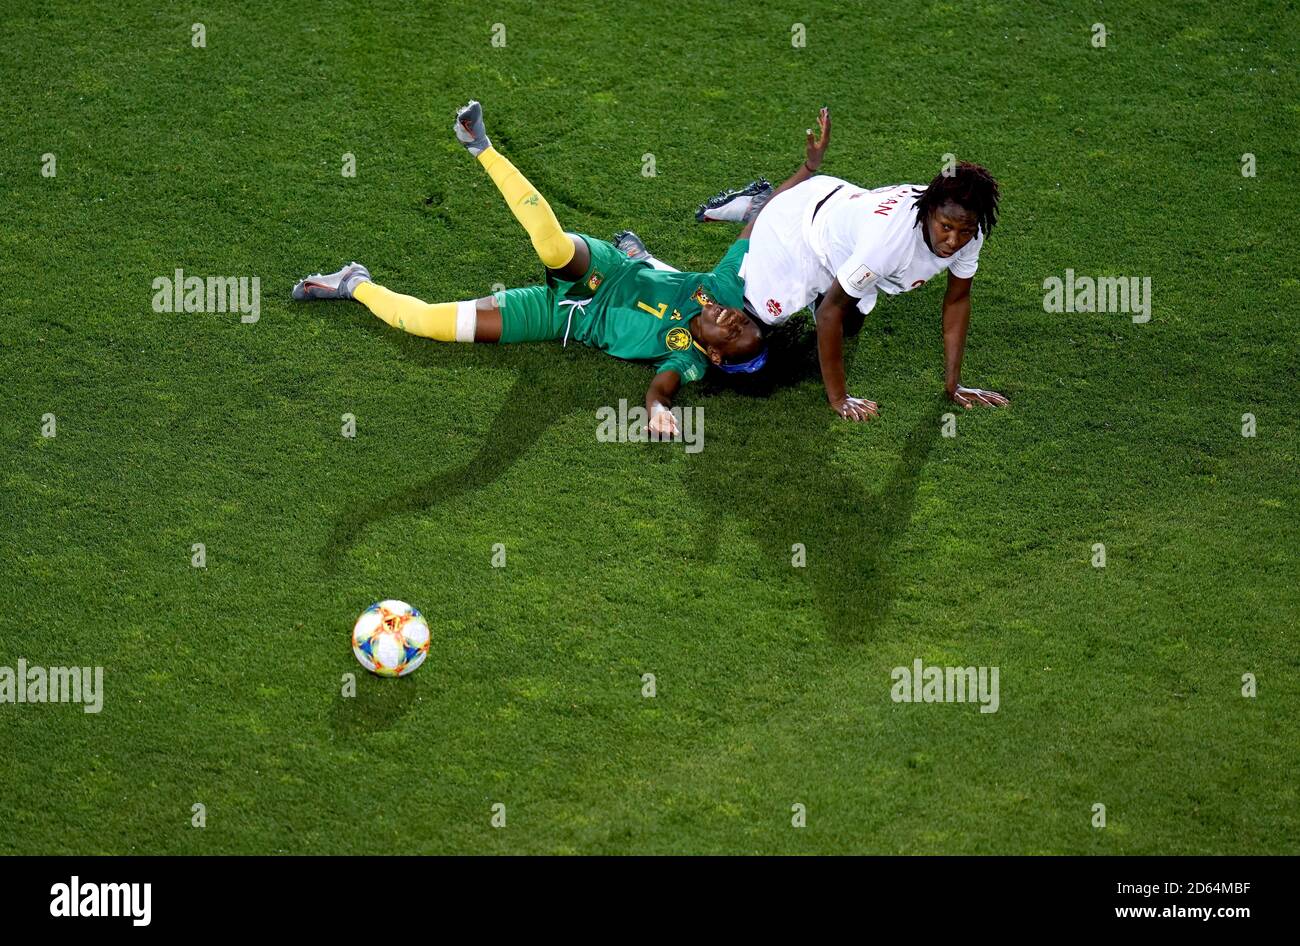 Cameroon's Gabrielle Onguene (left) and Canada's Kadeisha Buchanan lay on the pitch after clashing Stock Photo